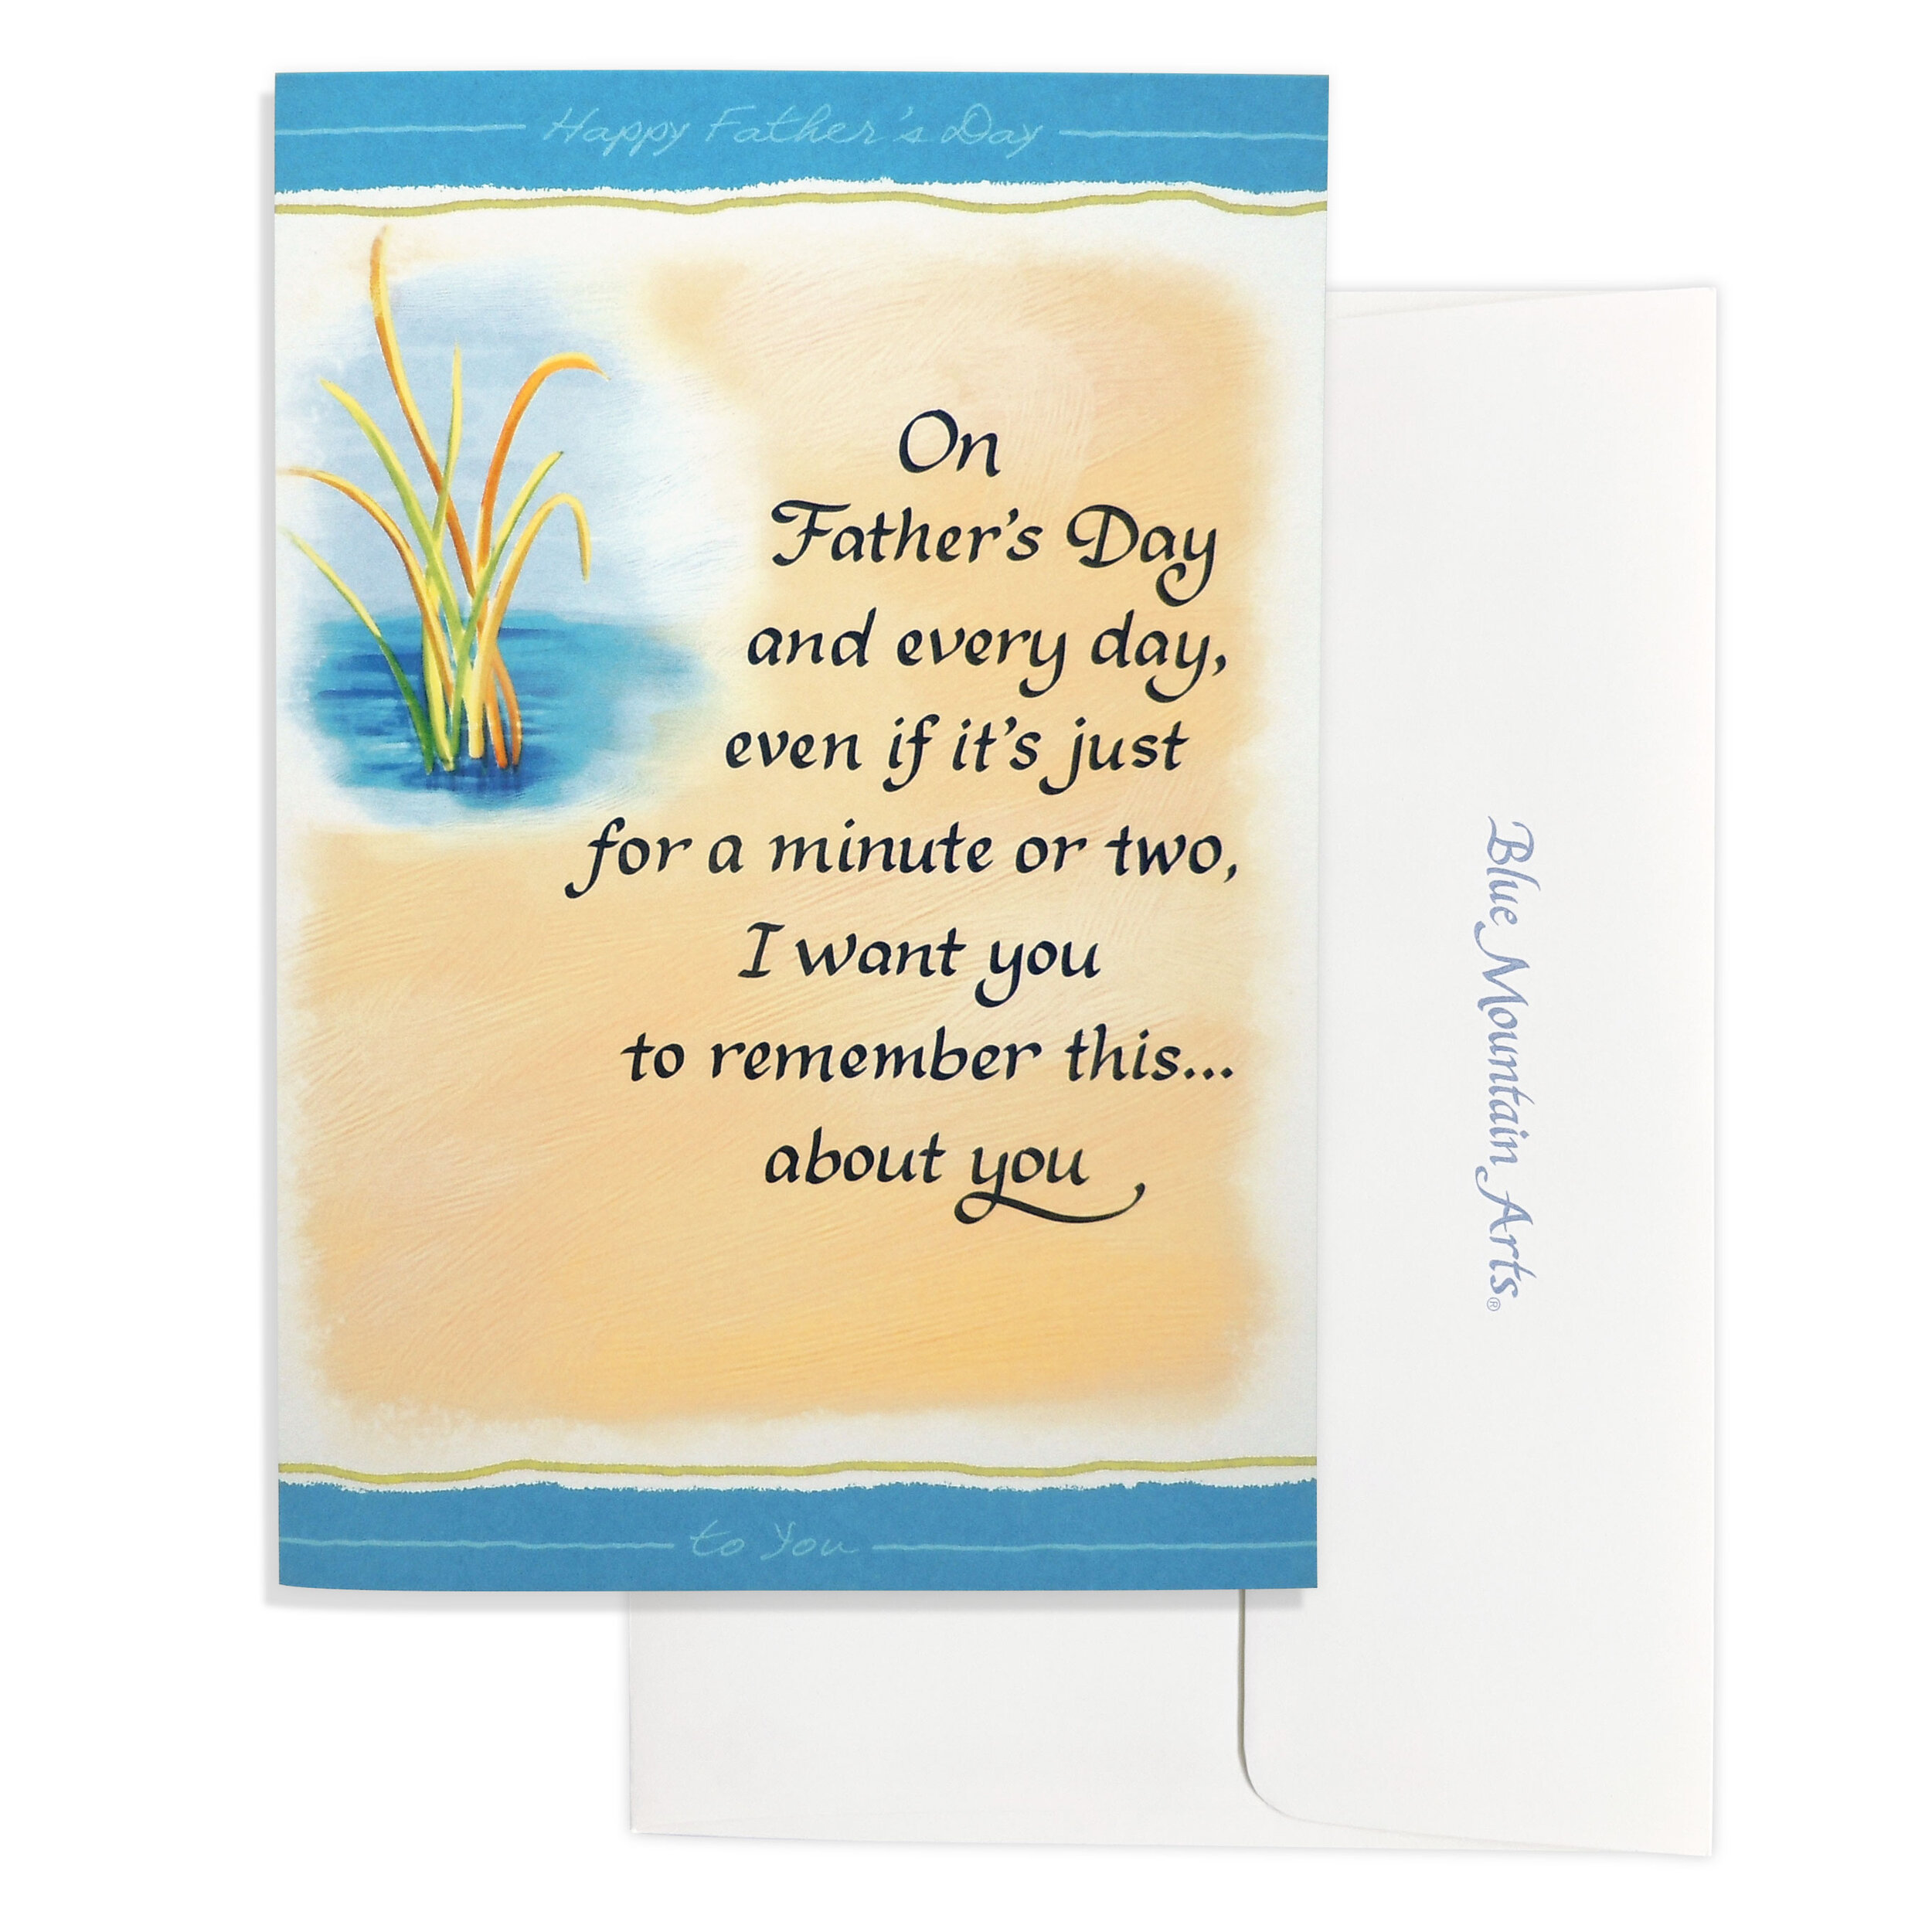 DAD Blue Mountain Arts Greeting Cards fathers day 